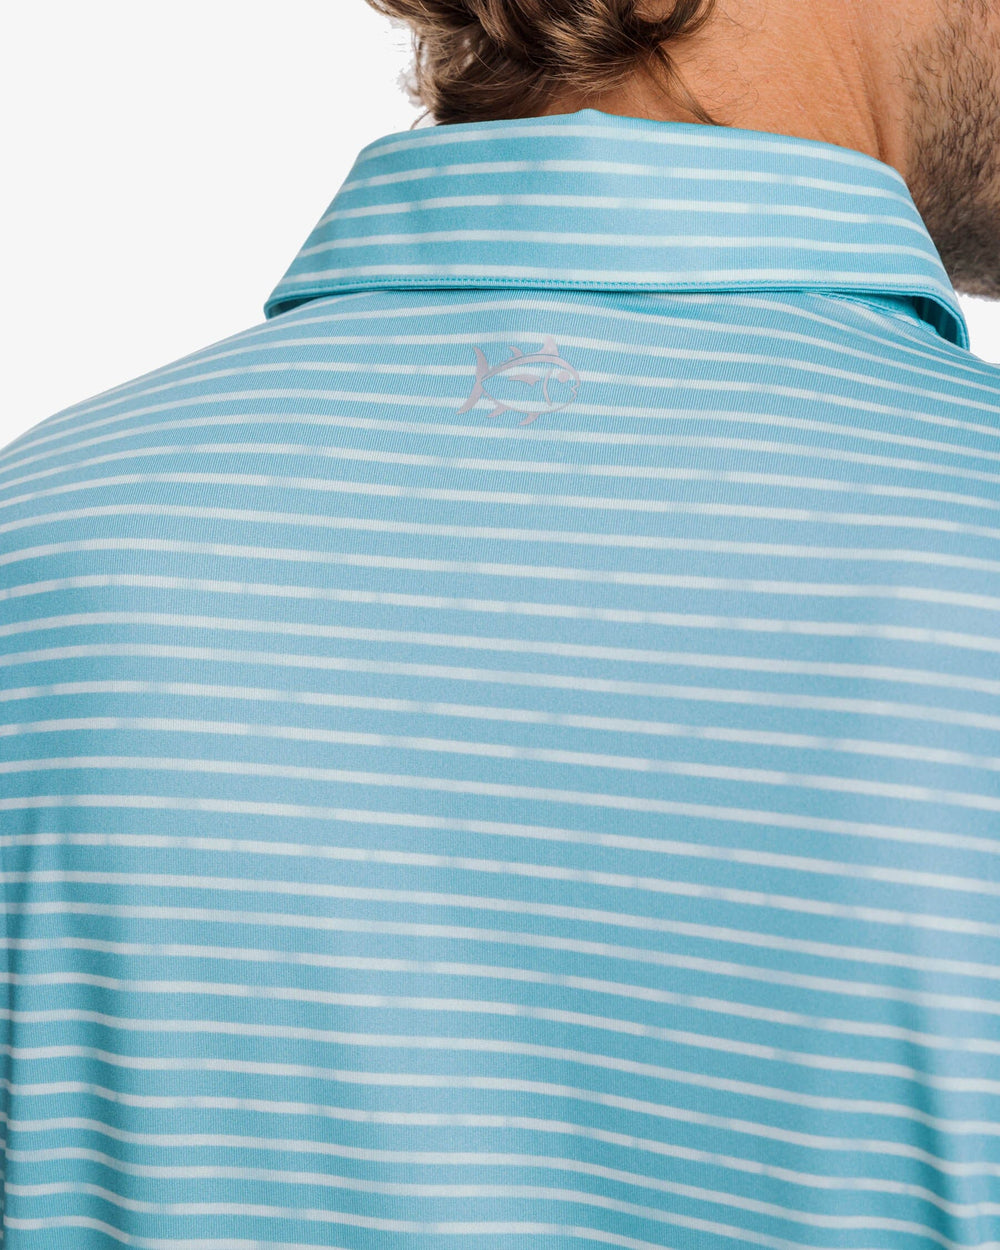 The detail view of the Southern Tide Driver Wymberly Stripe Performance Polo Shirt by Southern Tide - Tidal Wave